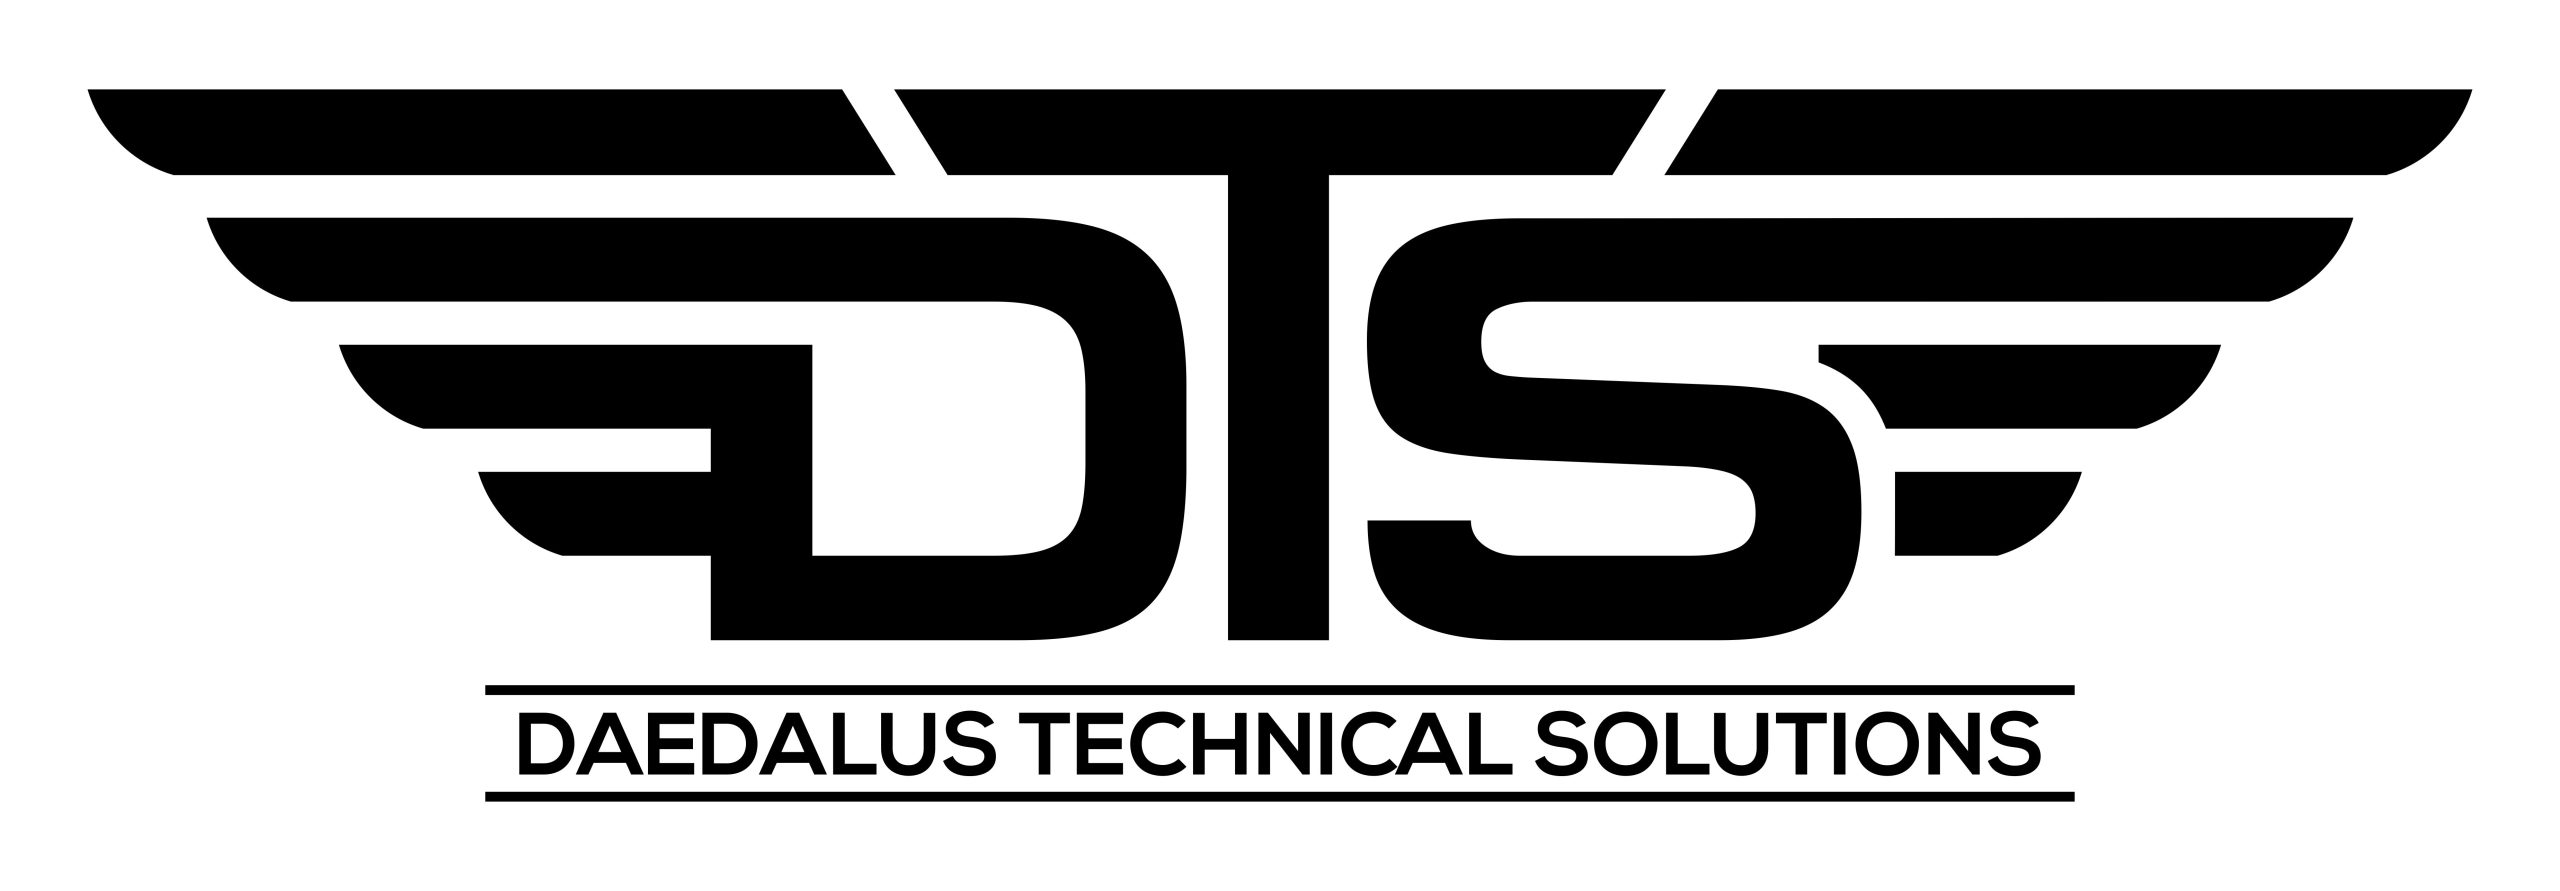 Daedalus Technical Solutions: Master Service Agreement